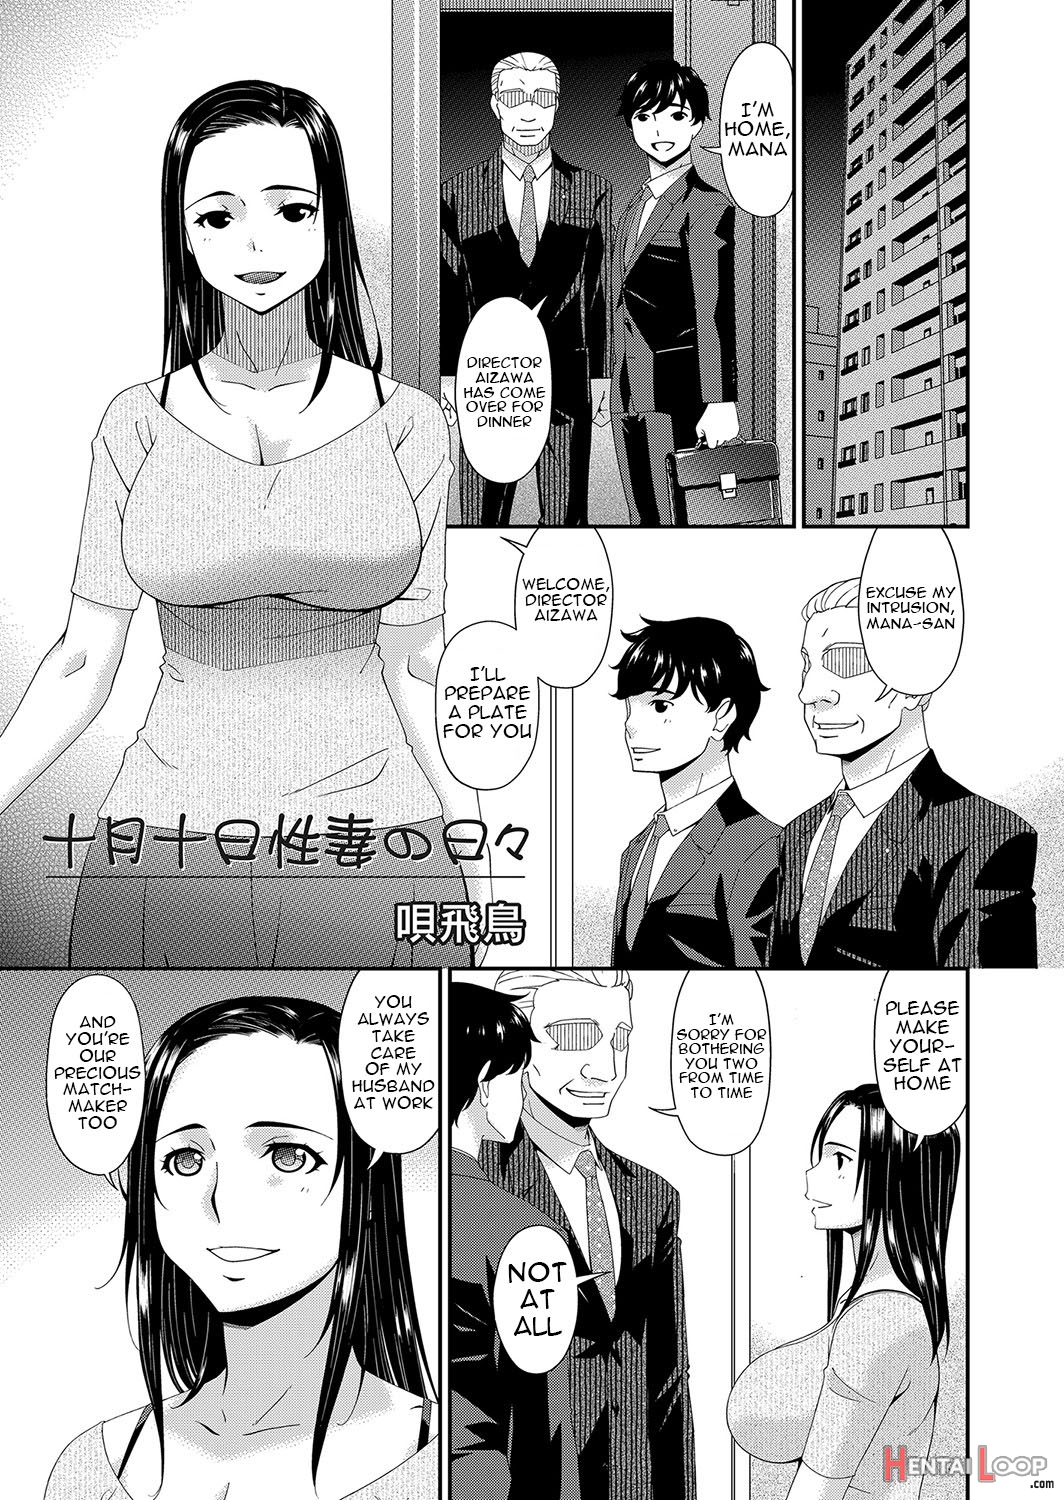 Read Tootsuki Tookas Sex-filled Days As A Housewife (by Bai Asuka) pic picture image